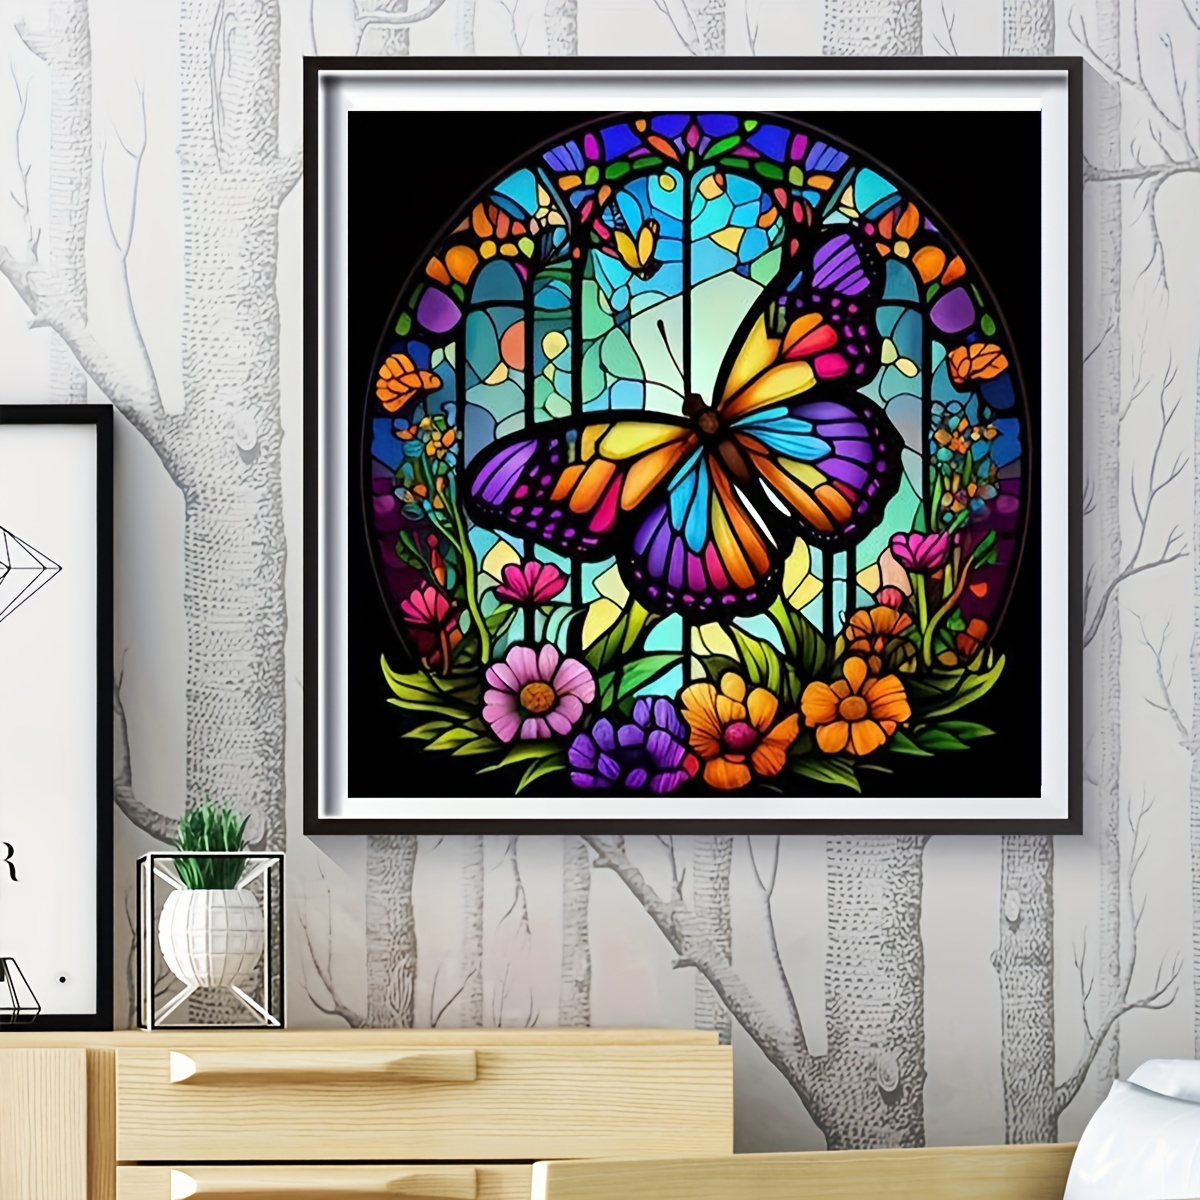 5D Diamond Painting Kits Seahorse Stained Glass DIY Diamond Full Round Drill Diamond Art Painting for Adults with Accessories for Home Wall Decor